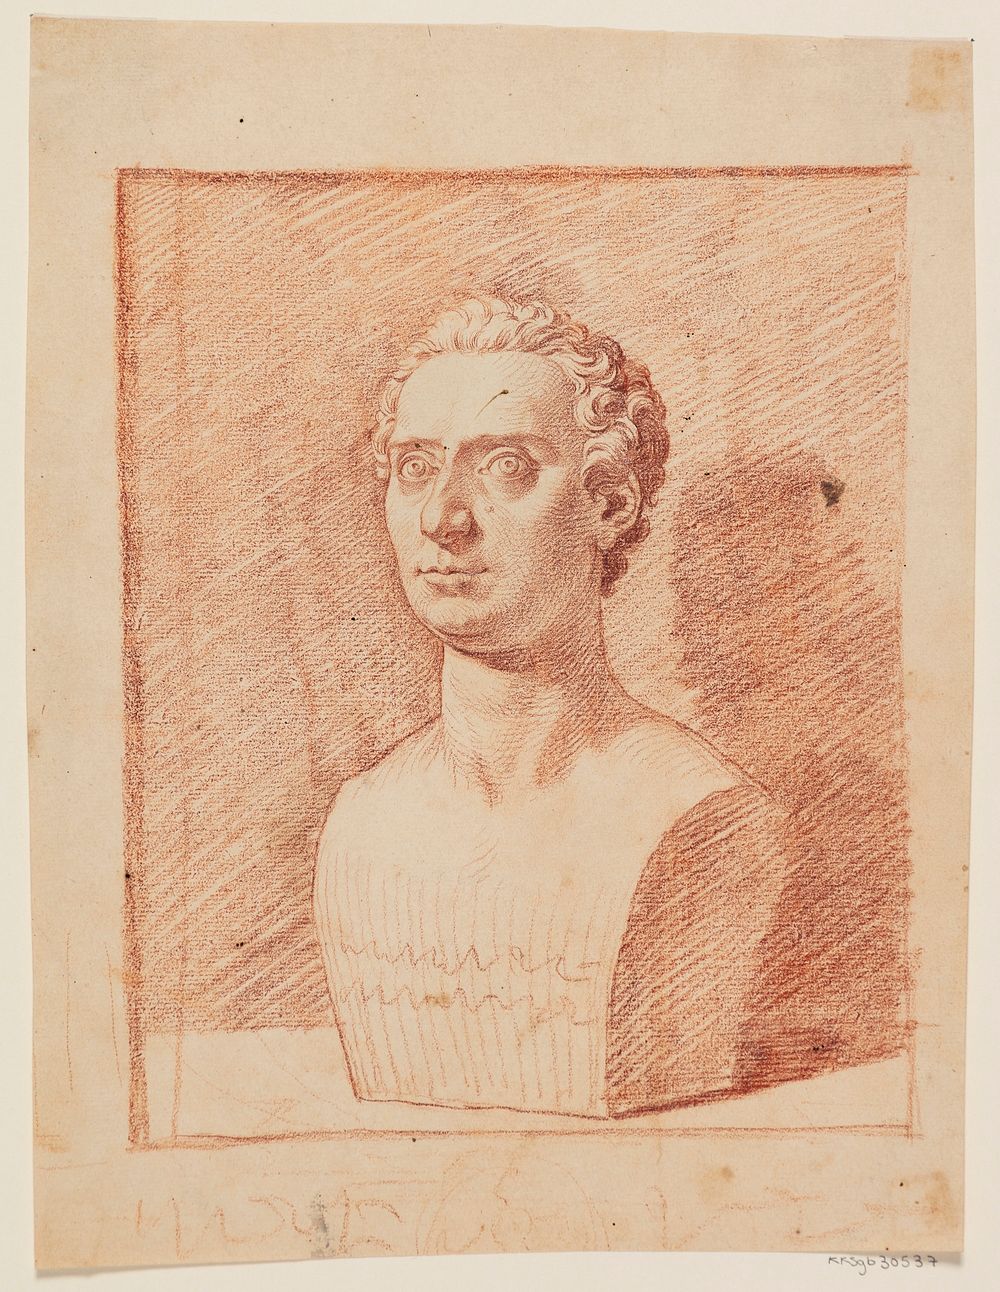 Sketch after marble bust pretending archaeologist Marcello Venuti (1700-1755) by Marcus Tuscher